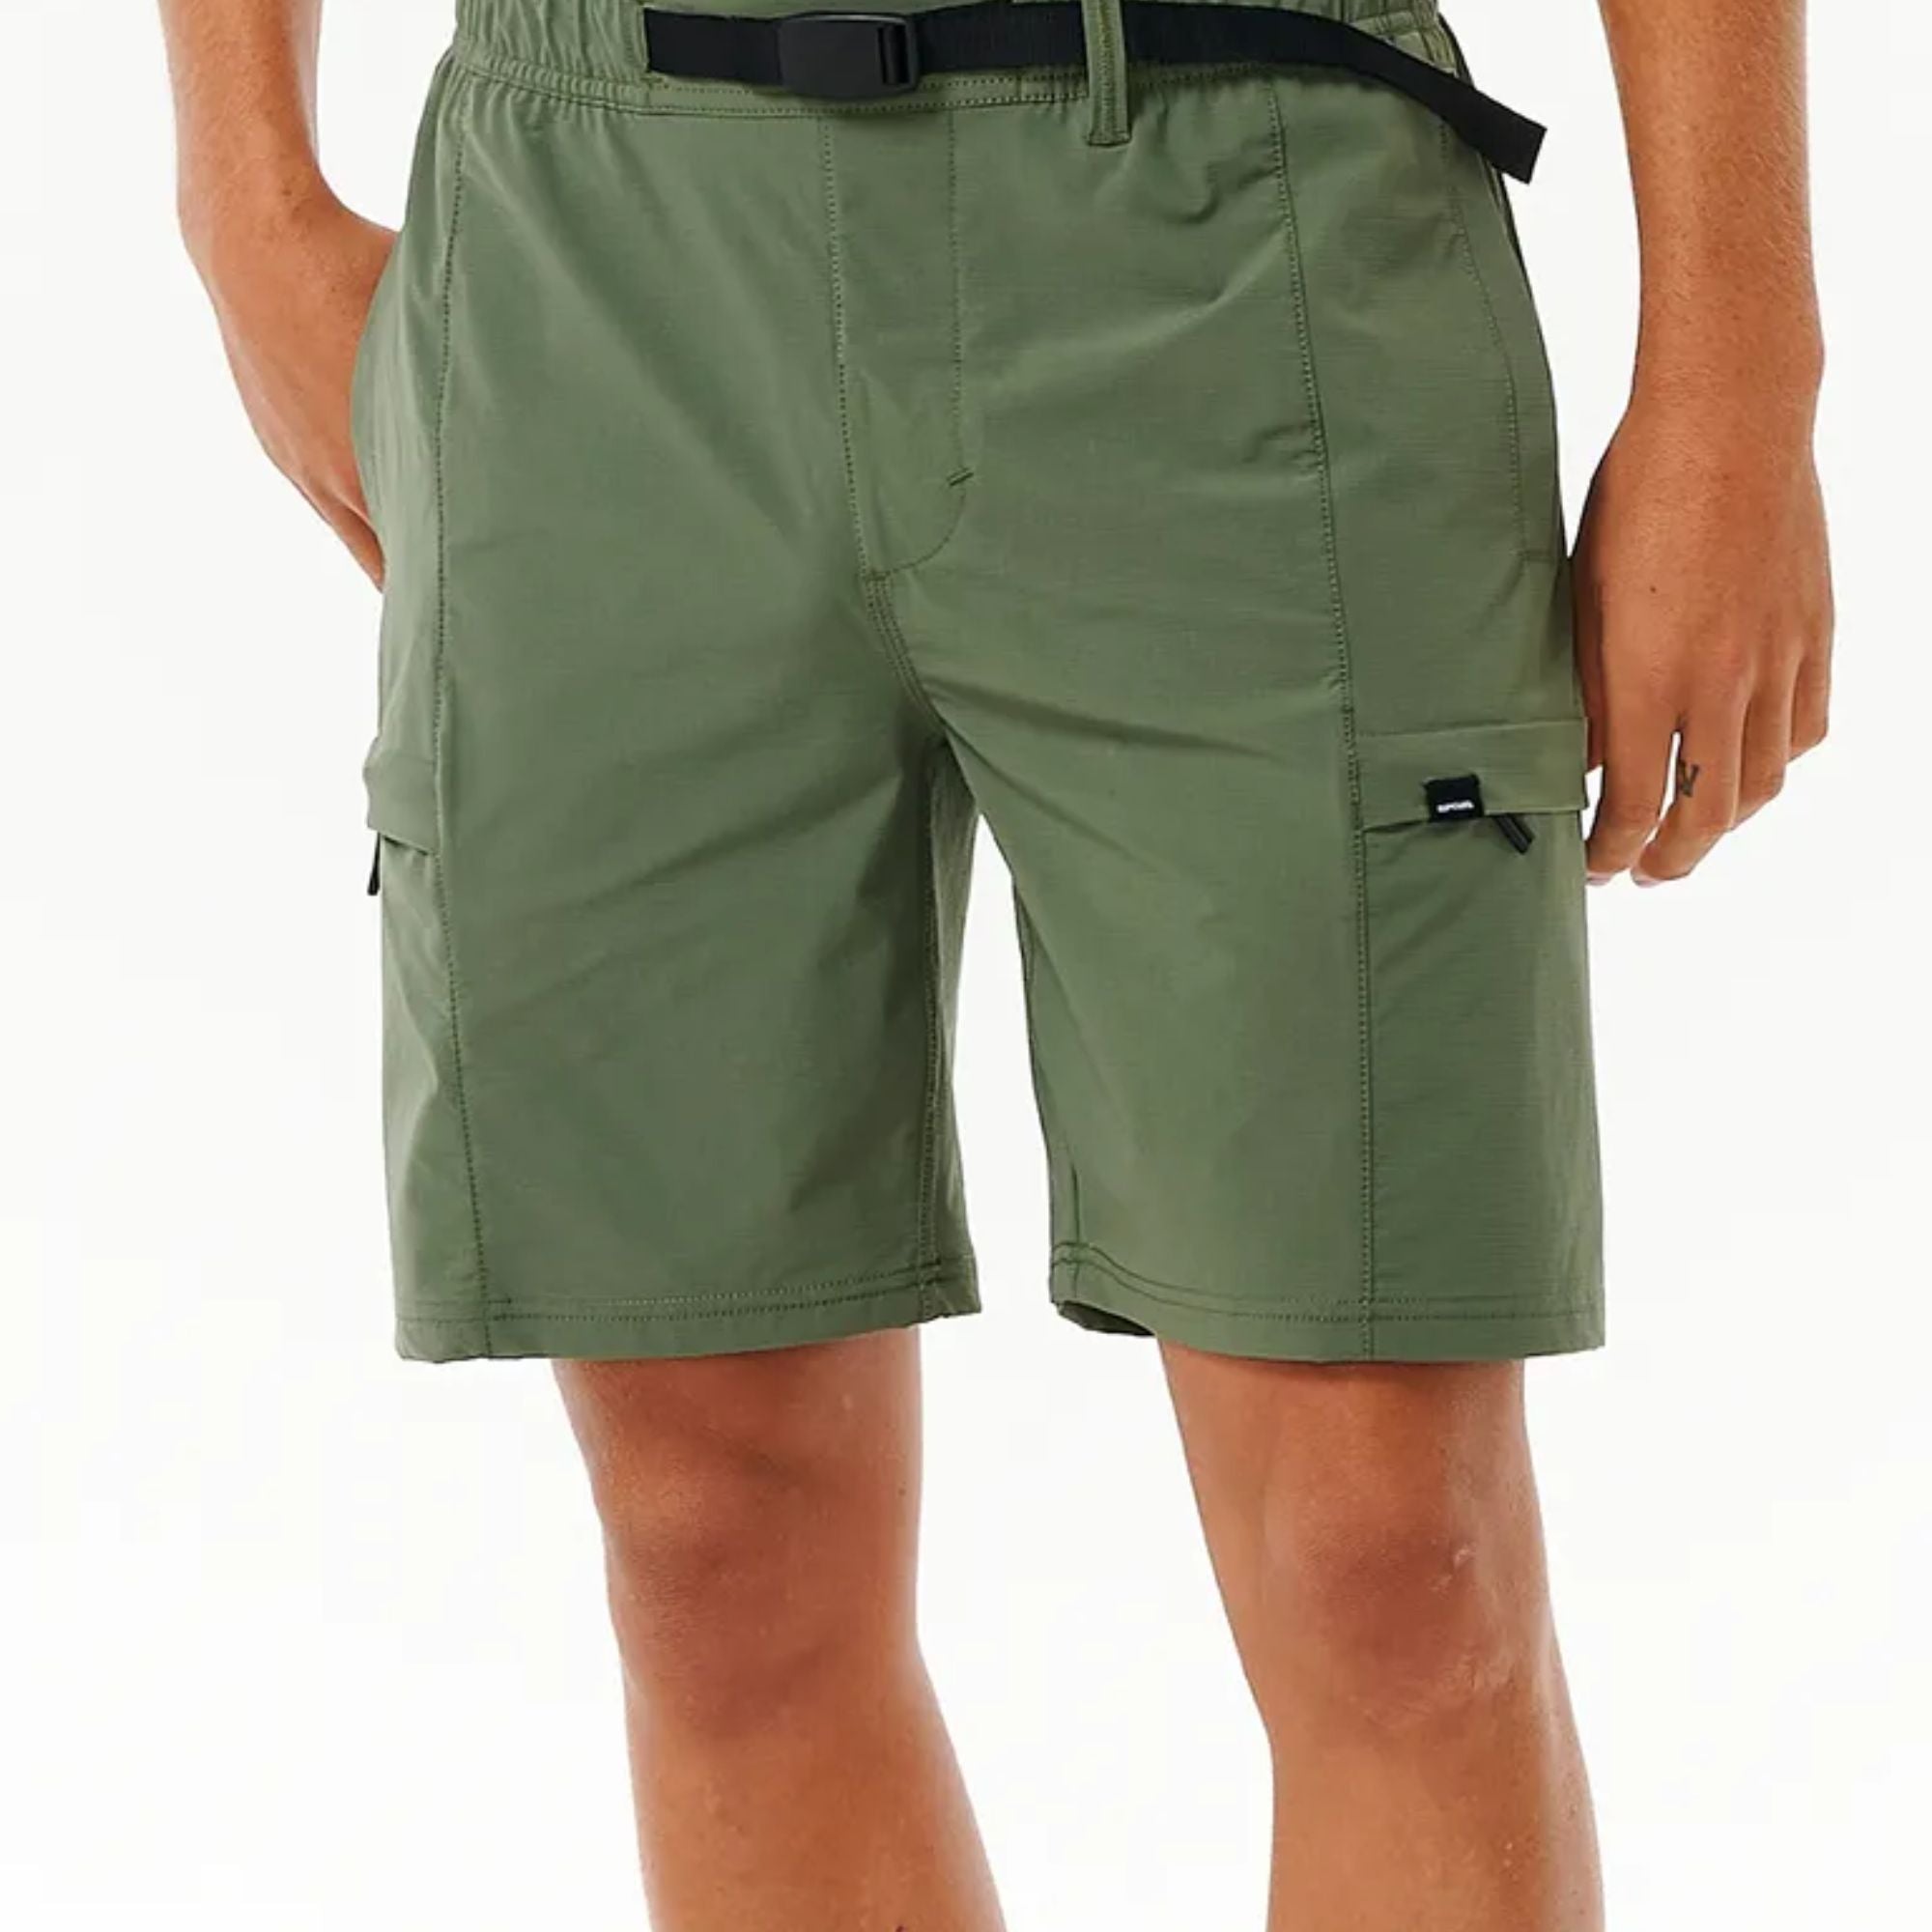 Ripcurl Boardwalk Buckled Cargo Volley Shorts | RIPCURL | Portwest - The Outdoor Shop